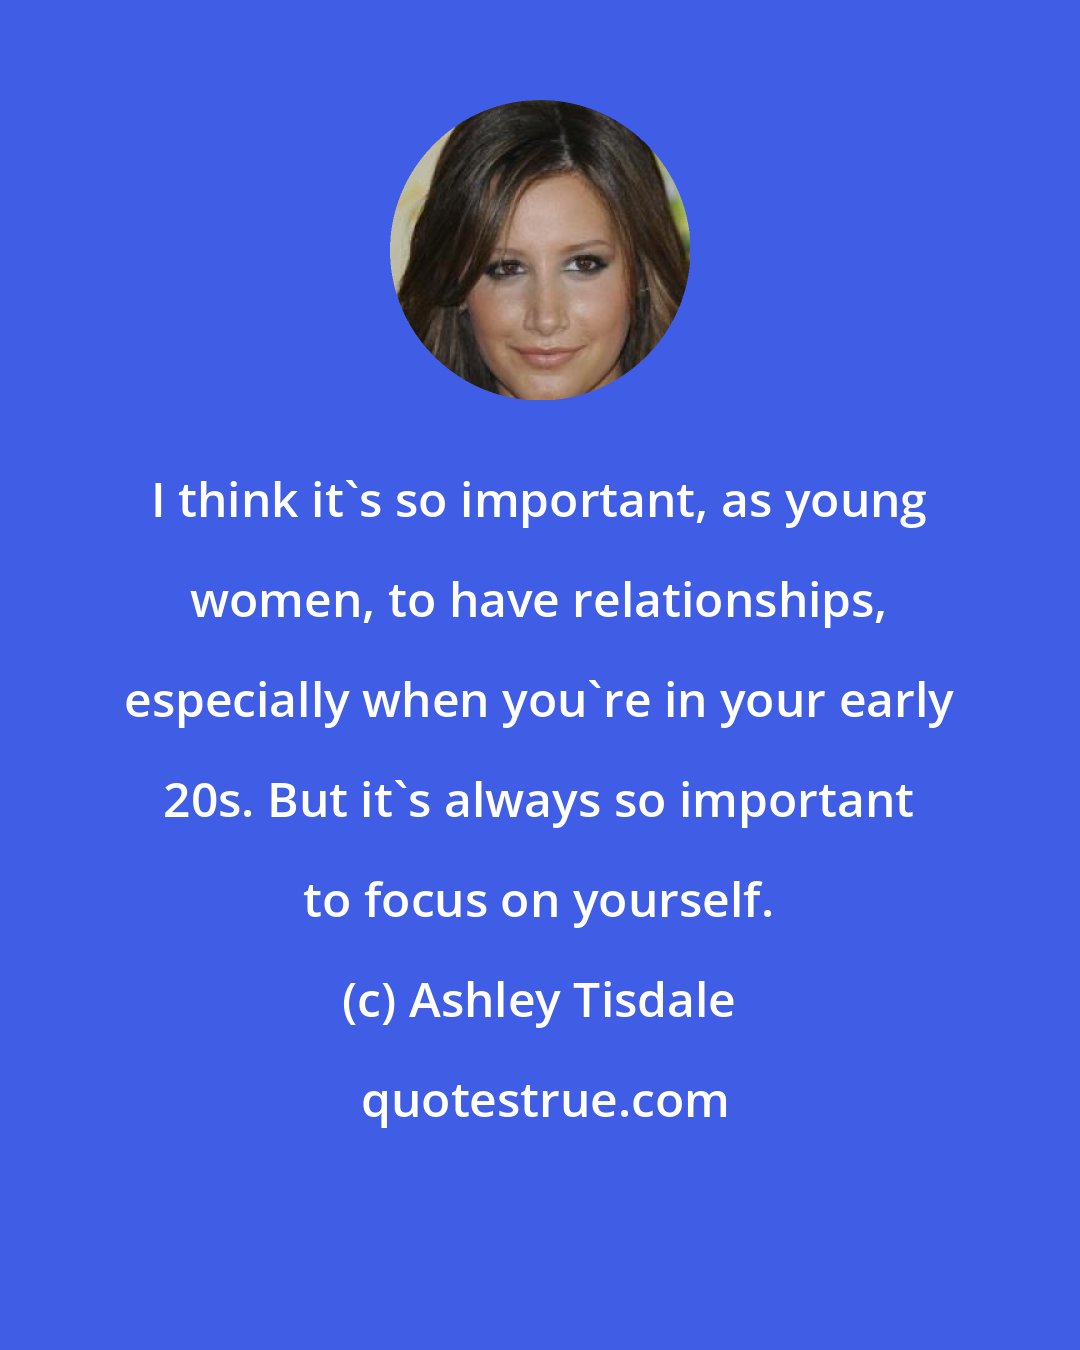 Ashley Tisdale: I think it's so important, as young women, to have relationships, especially when you're in your early 20s. But it's always so important to focus on yourself.